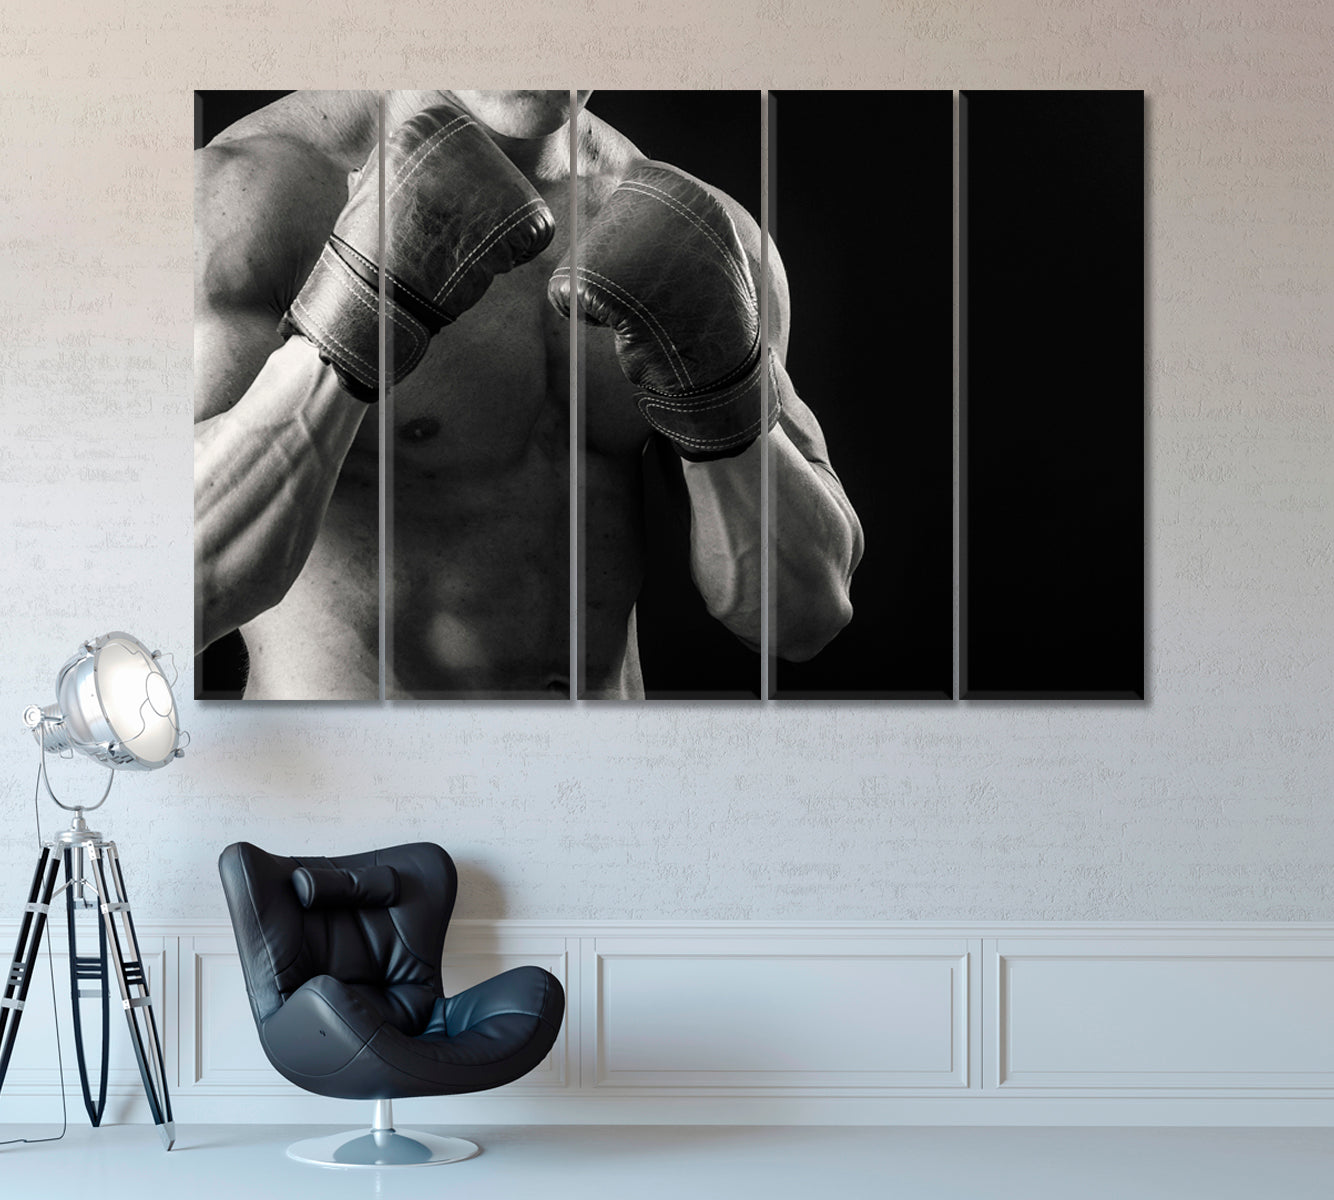 Boxer in Boxing Gloves Canvas Print ArtLexy 5 Panels 36"x24" inches 